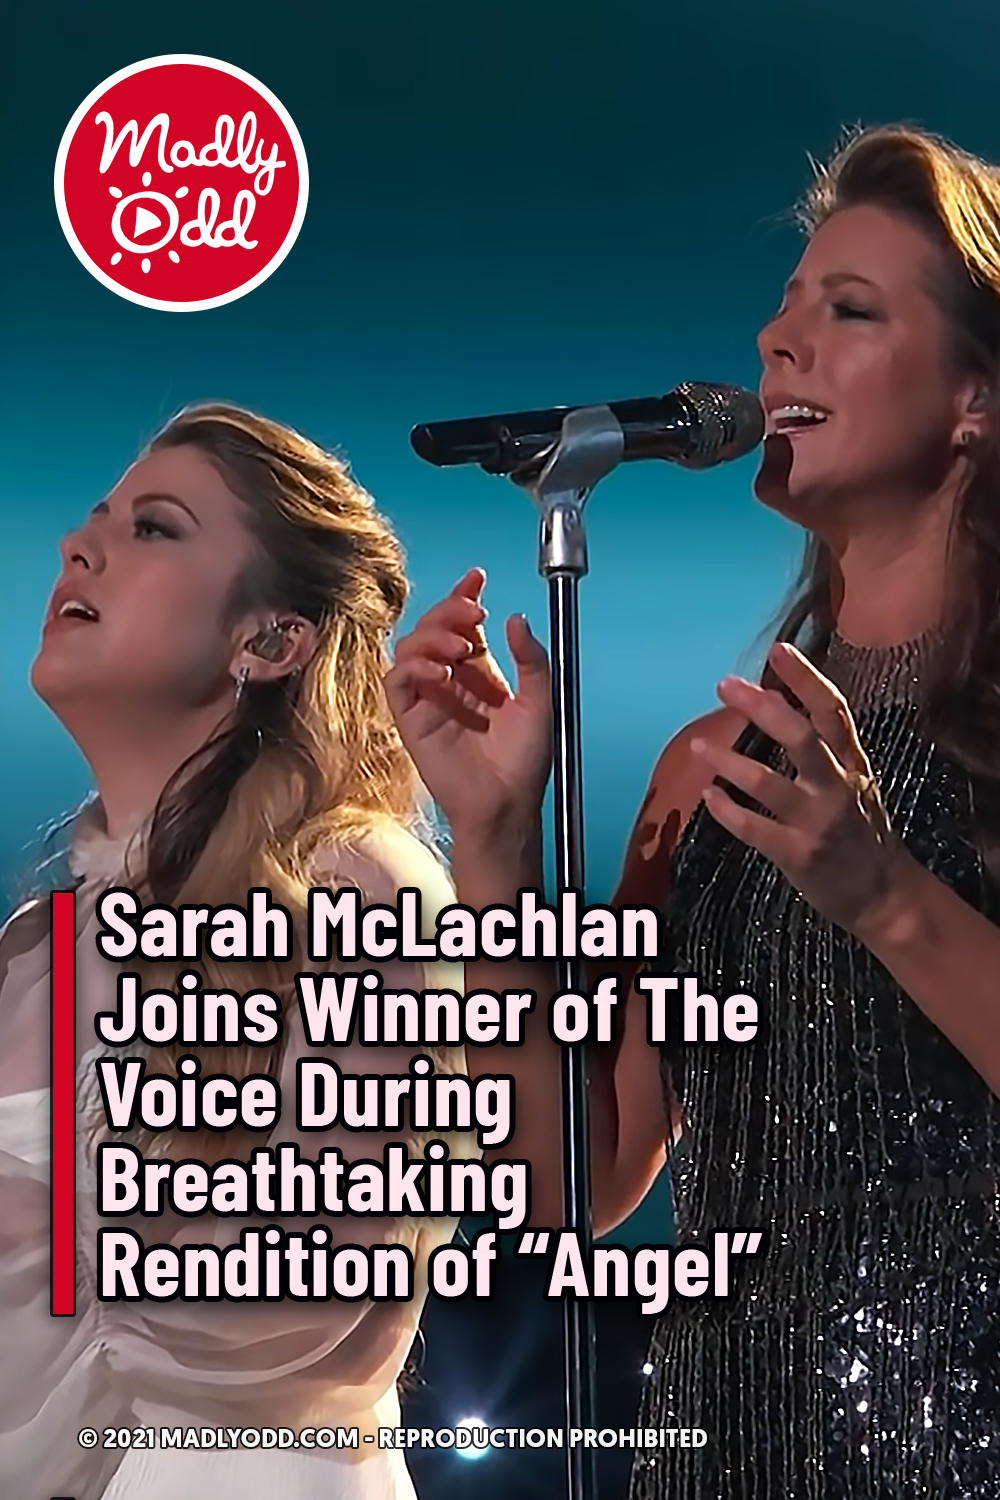 Sarah McLachlan Joins Winner of The Voice During Breathtaking Rendition of “Angel”